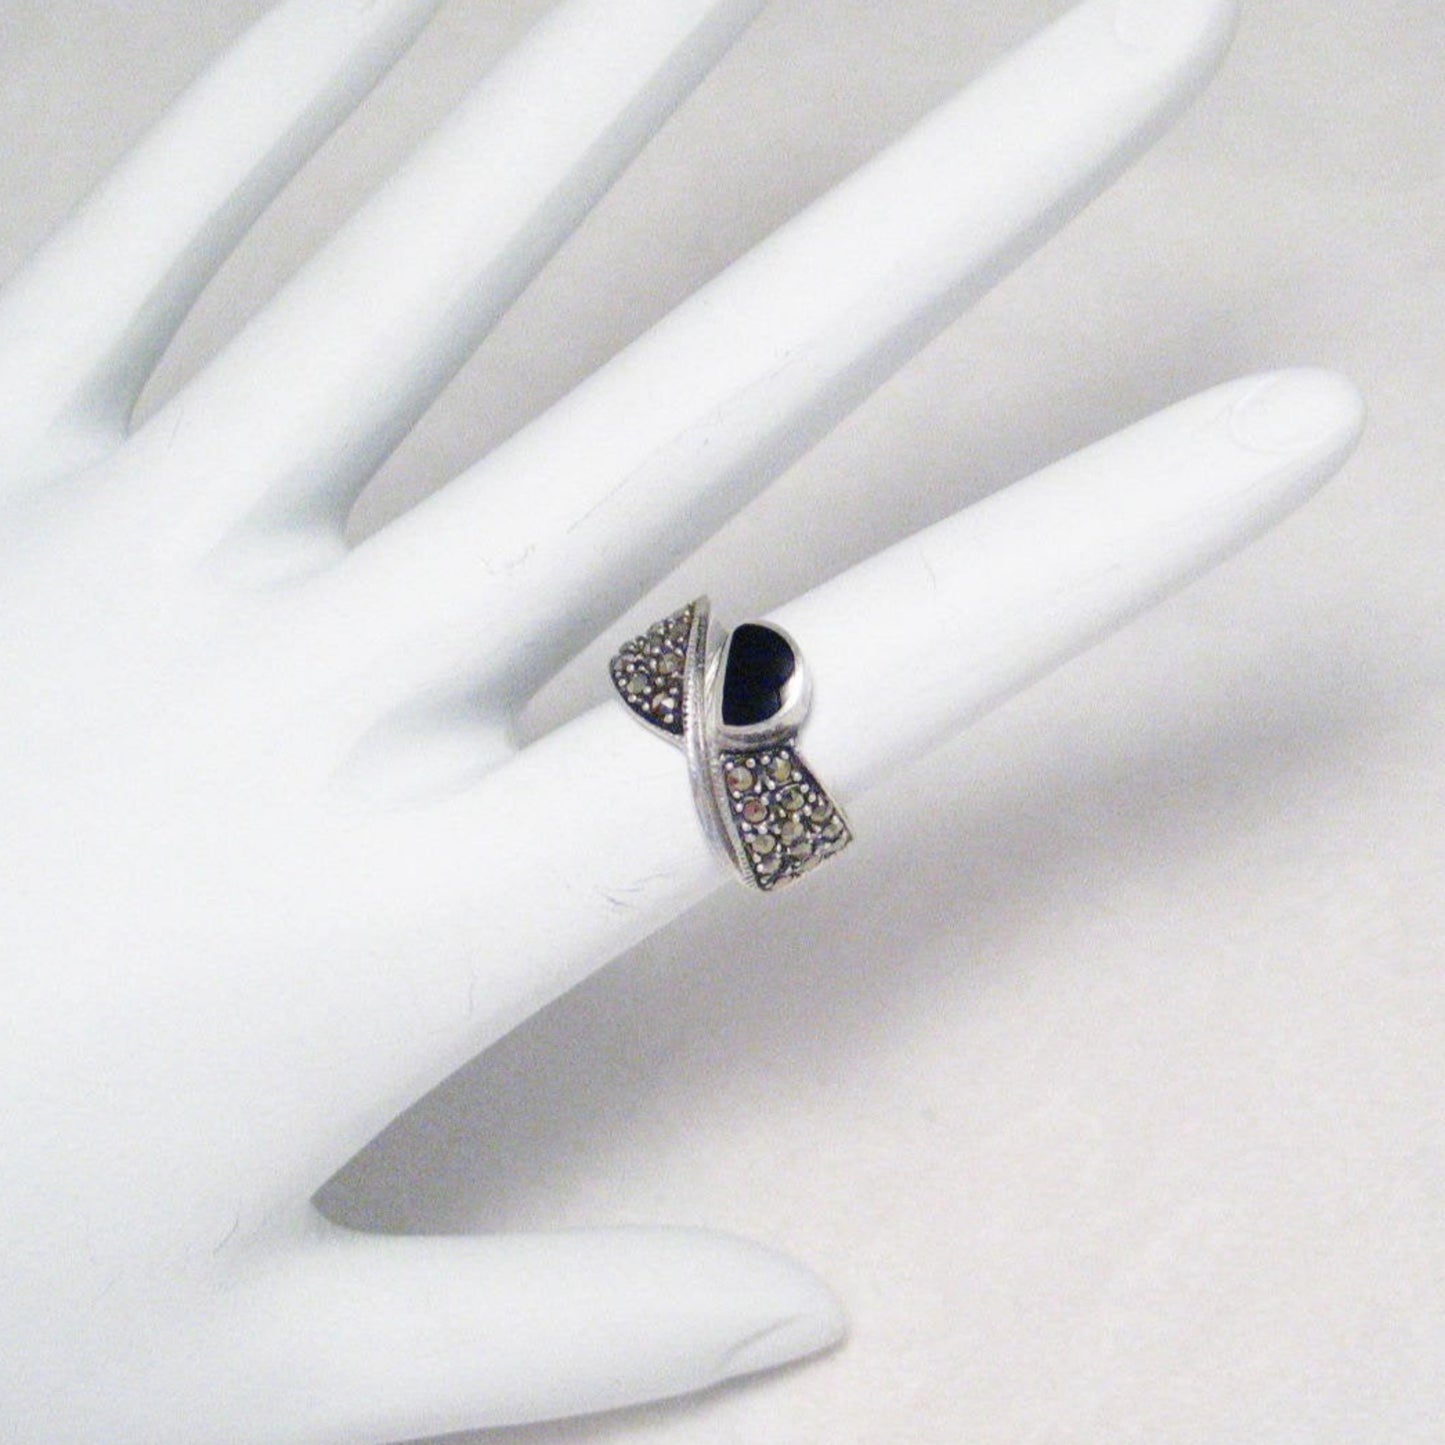 Stone Ring, sz 5.25 Pre-owned Unique Dastar Style Bypassing Black Onyx Marcasite Sterling Silver Ring -  Blingschlingers